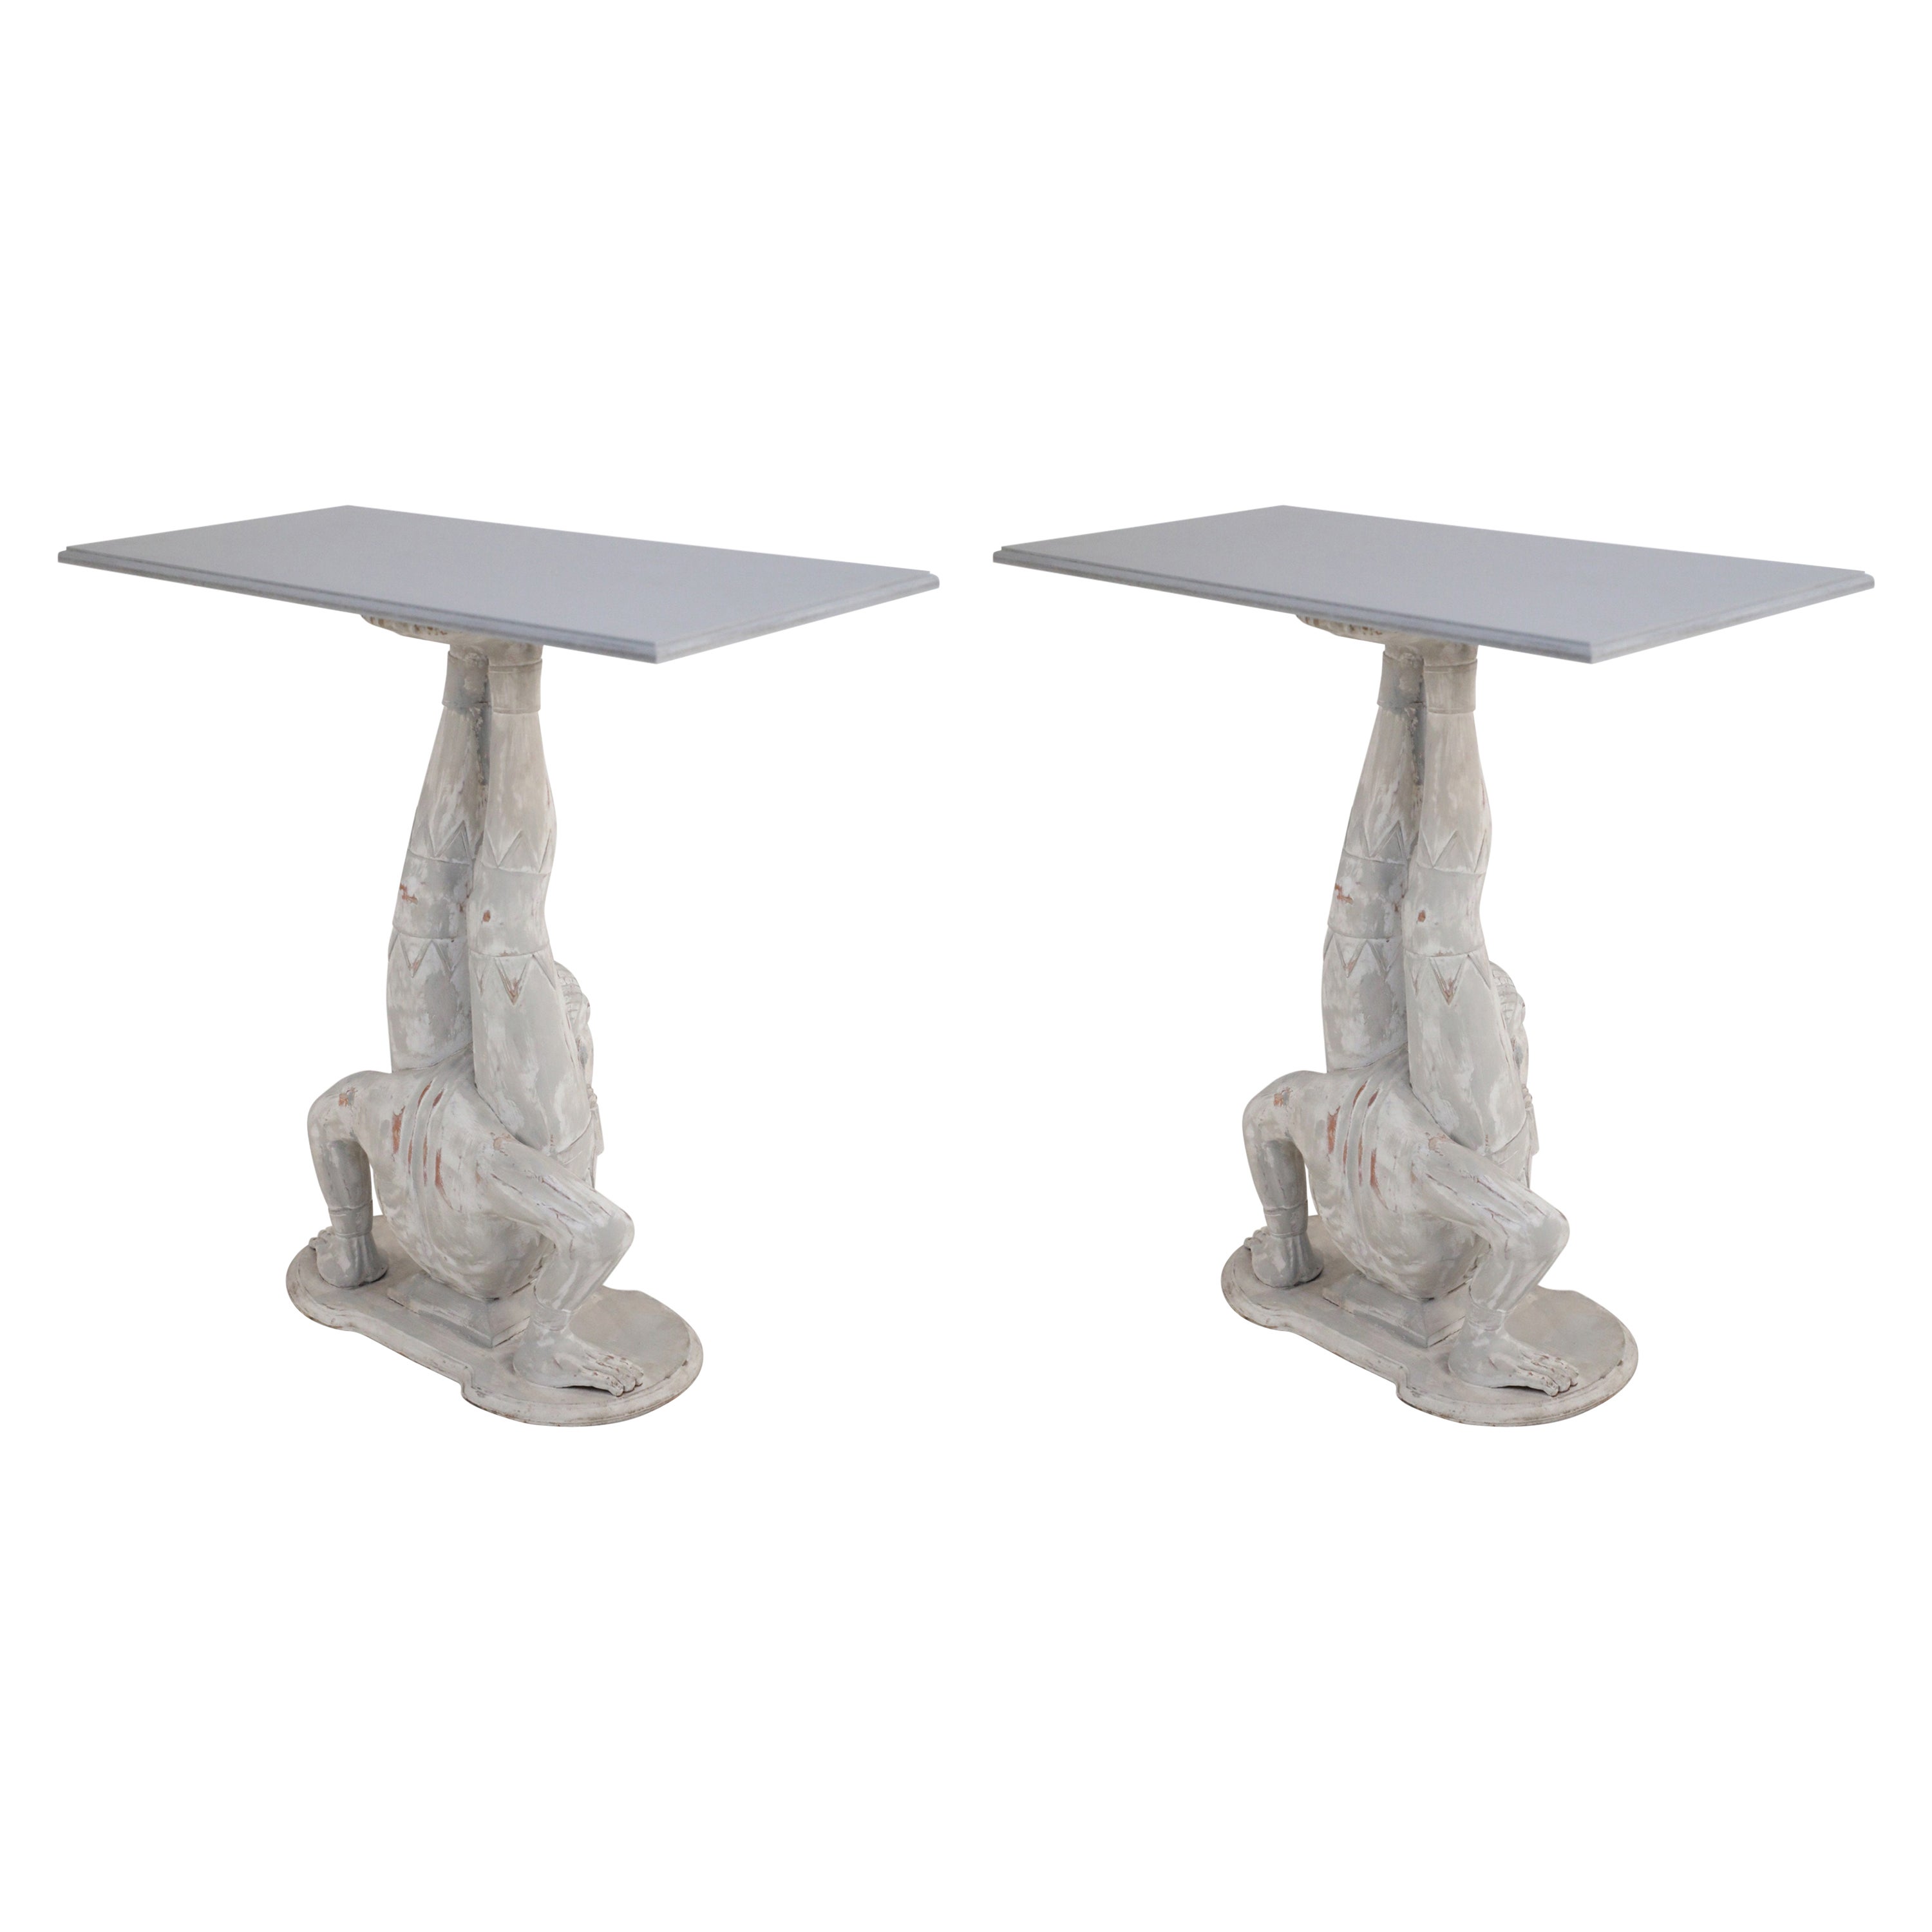 Pair of Chinese Wooden White Painted Contortionist Console Tables